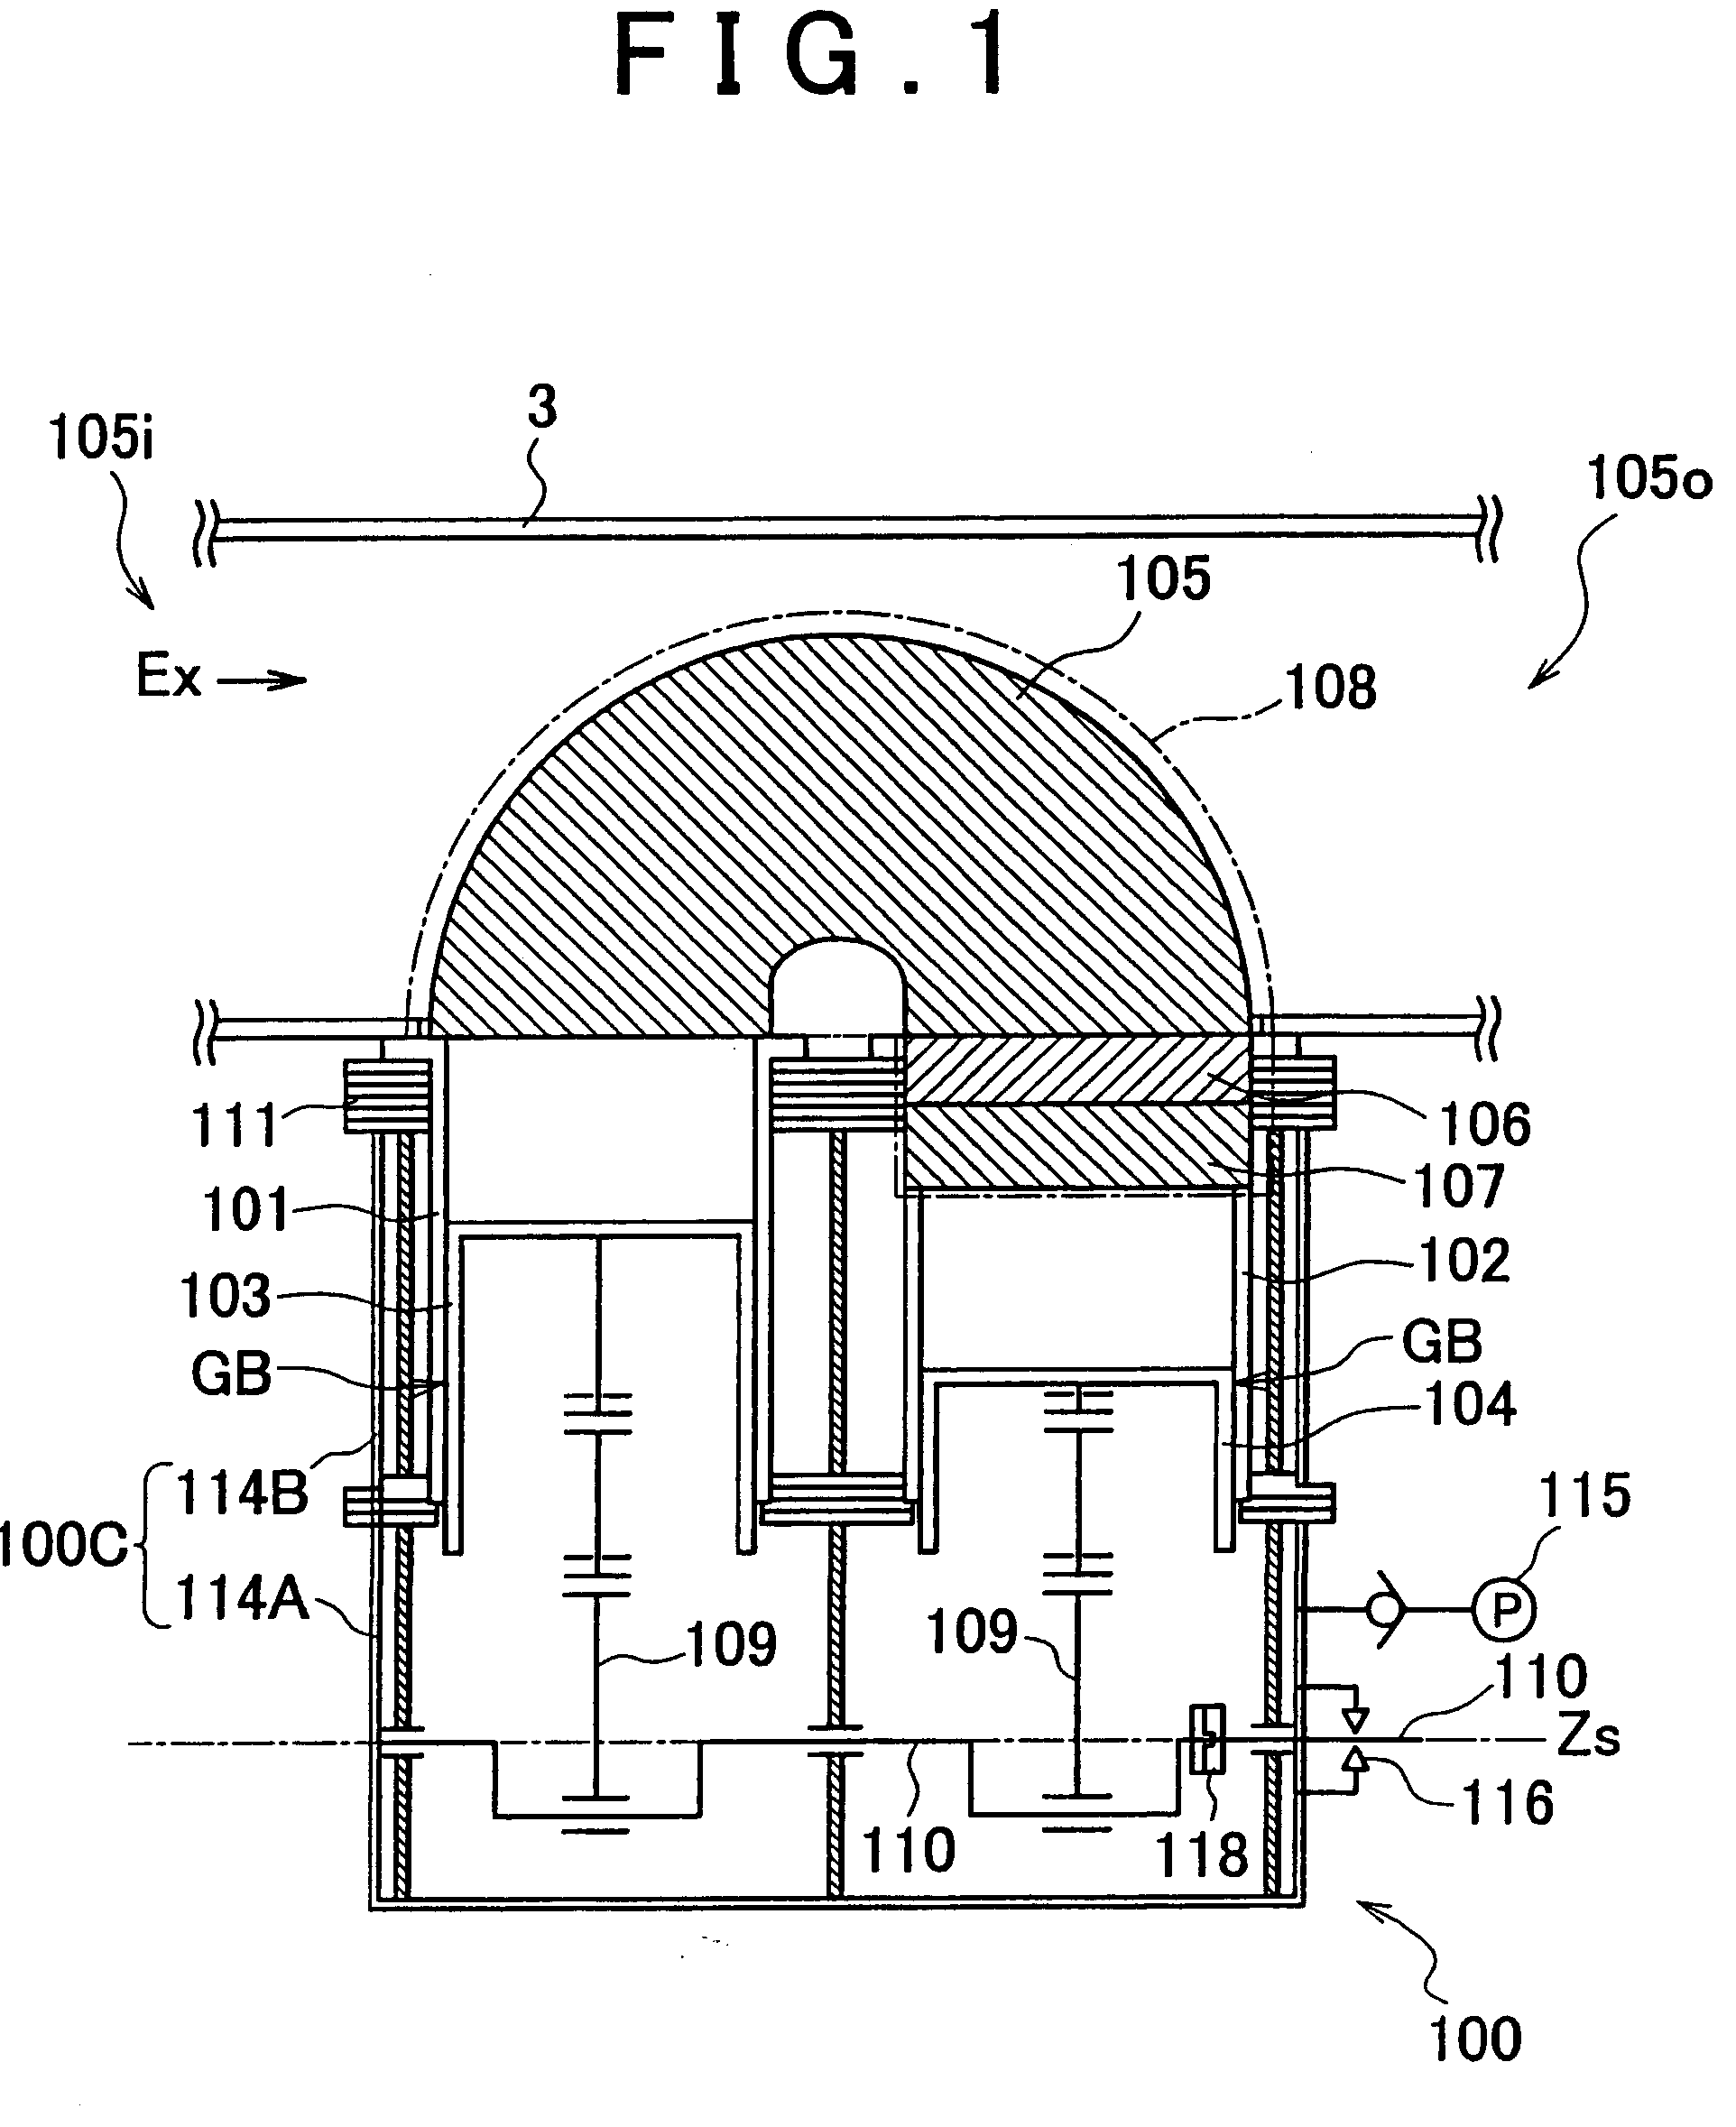 Exhaust Heat Recovery Apparatus